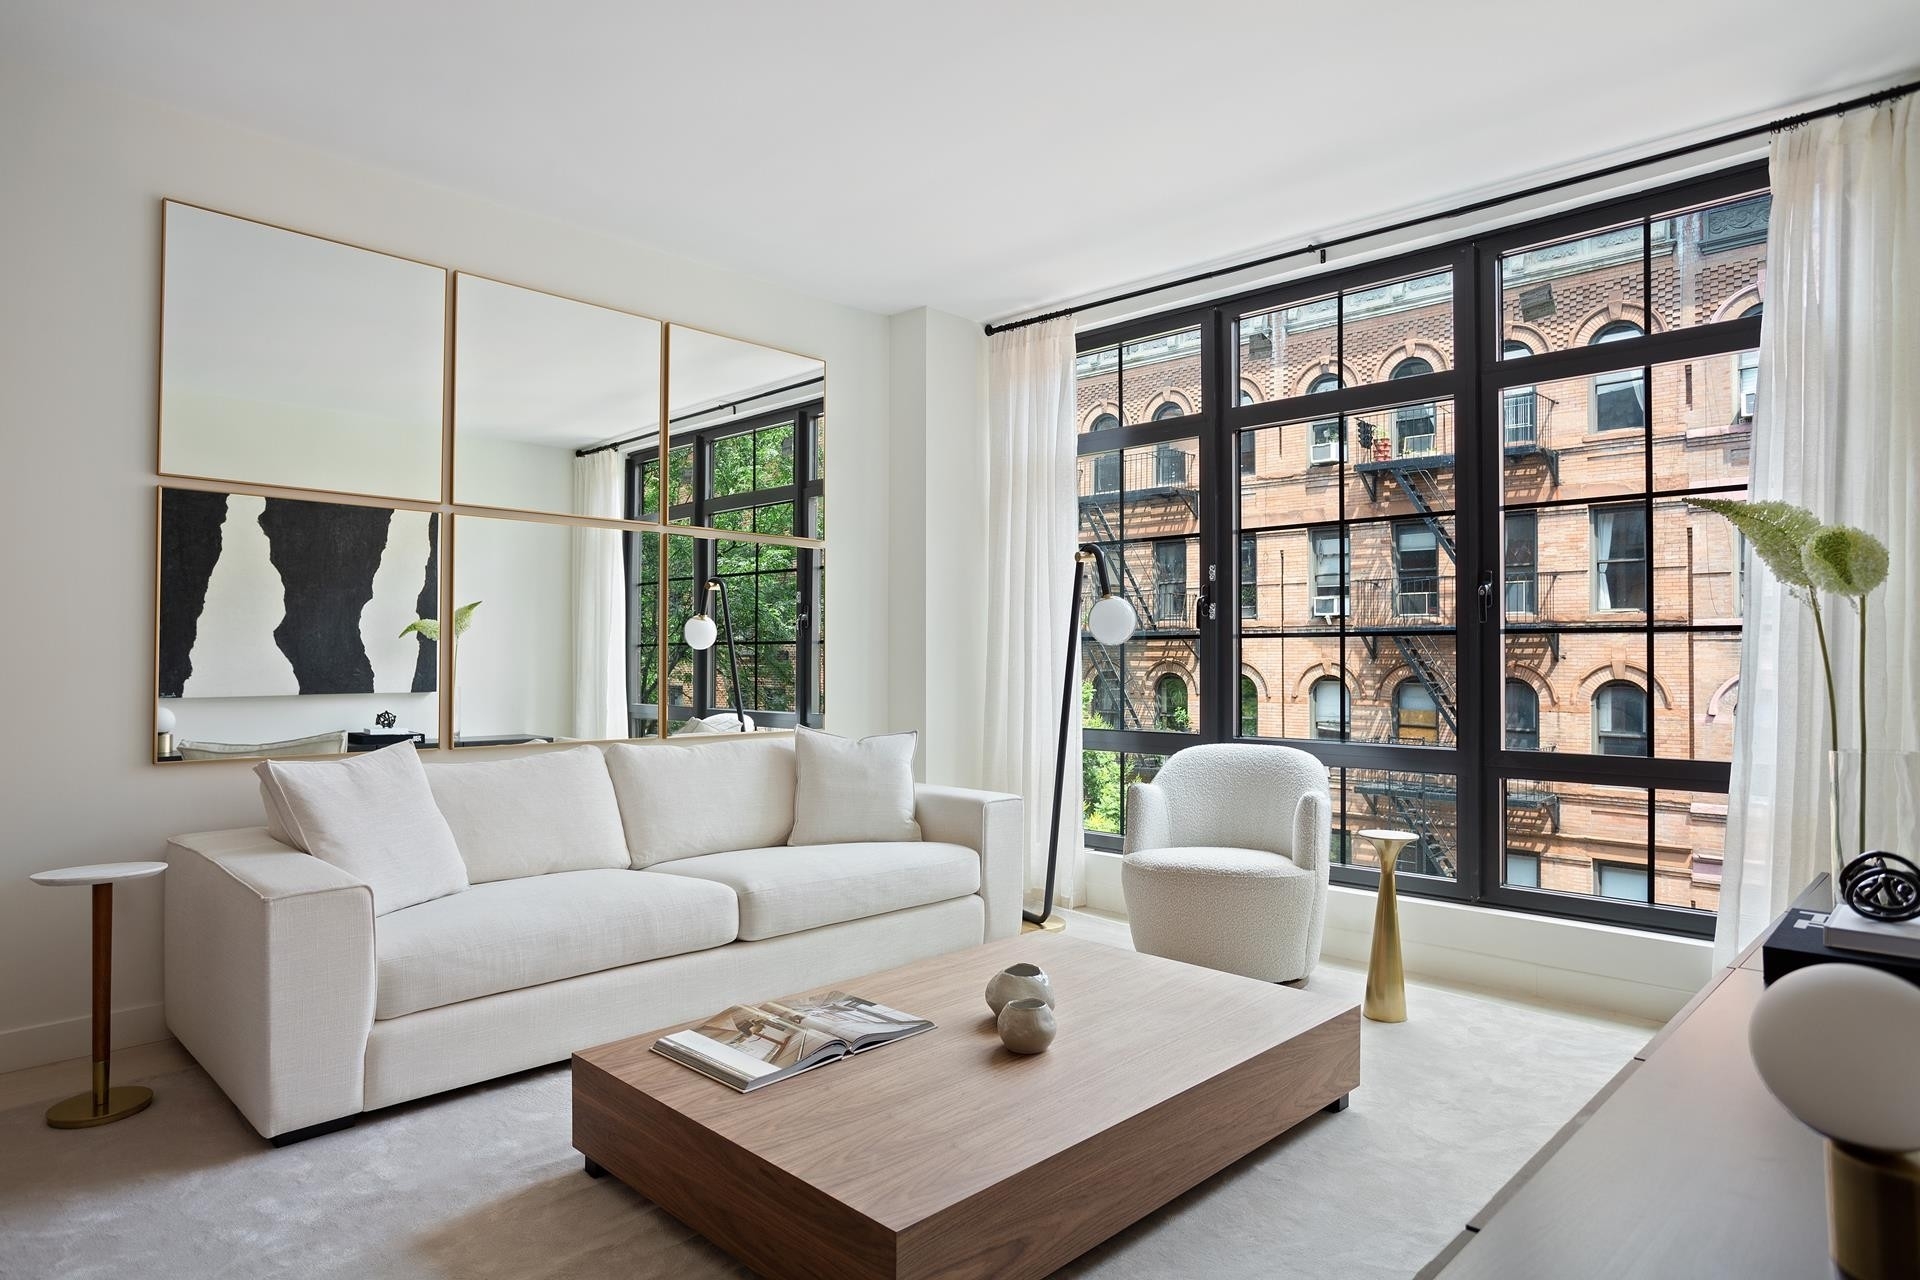 Condominium for Sale at The Marx, 324 E 93RD ST, 3 Yorkville, New York, New York 10128